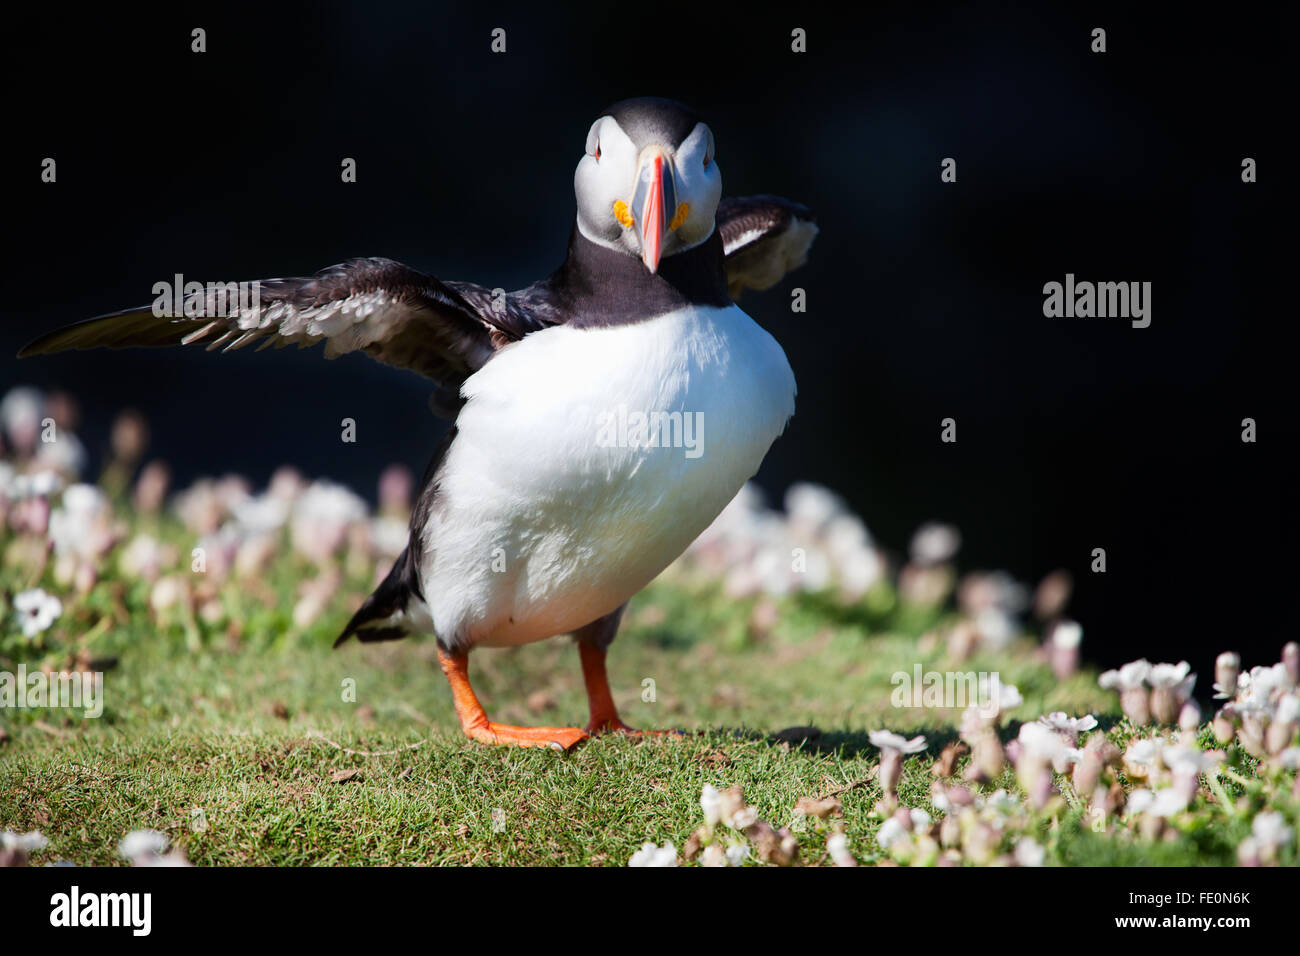 A Puffin flexing its wings on a headland Resting before flying off to look for food. Located on the wick at skomer island, wales Stock Photo